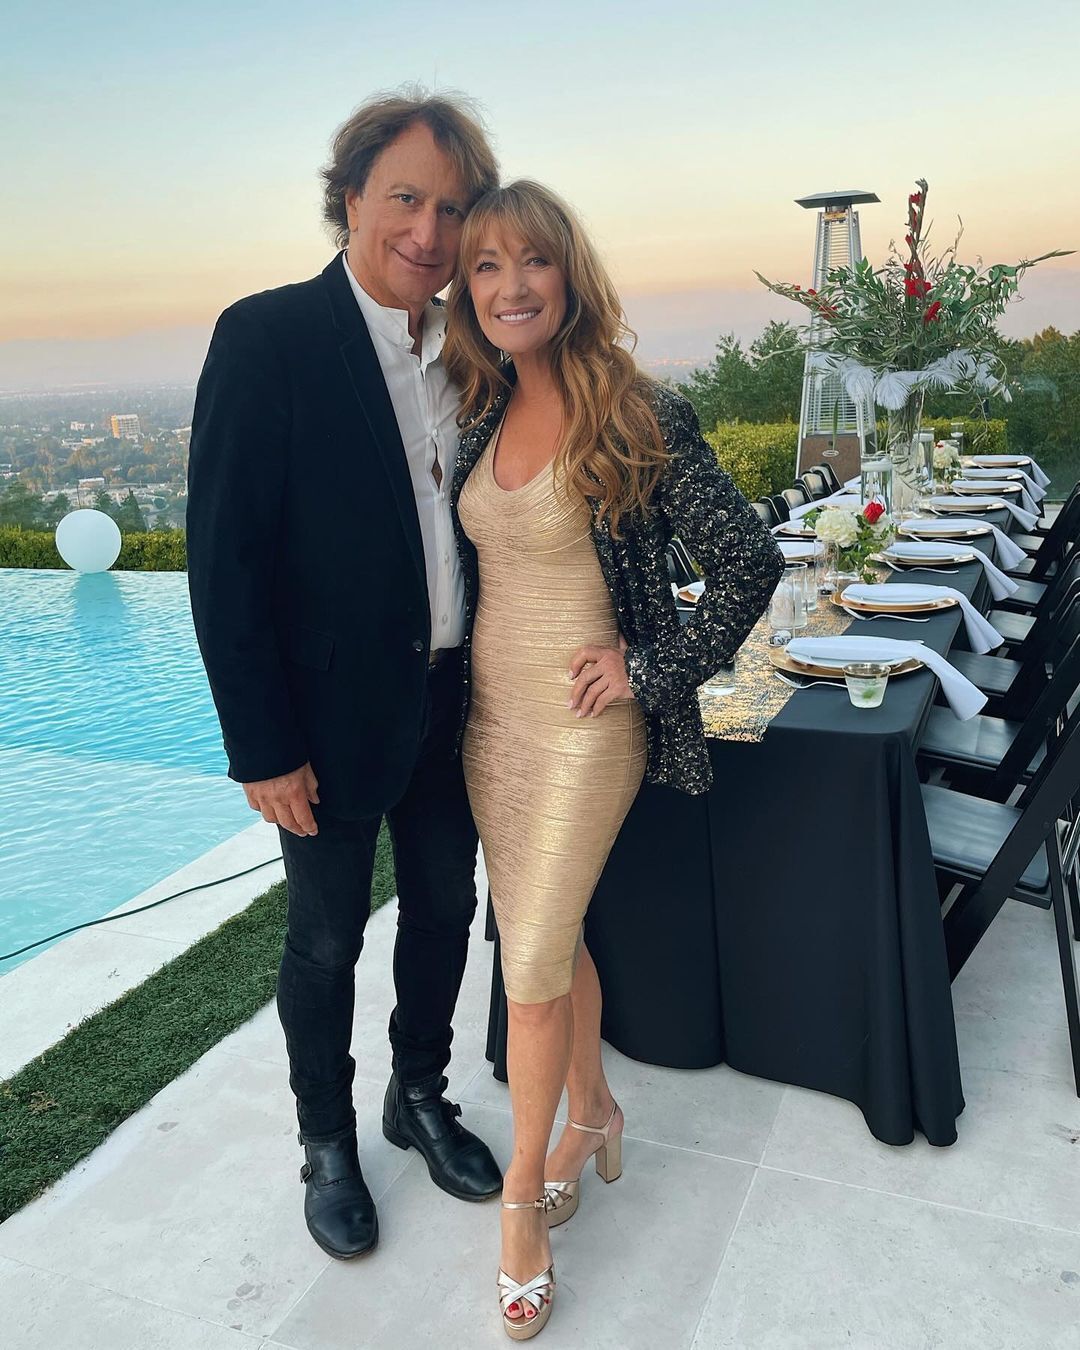 In love to the point of madness: what is the secret of 72-year-old ''James Bond girl'' Jane Seymour's relationship with 73-year-old musician John Zambetti?